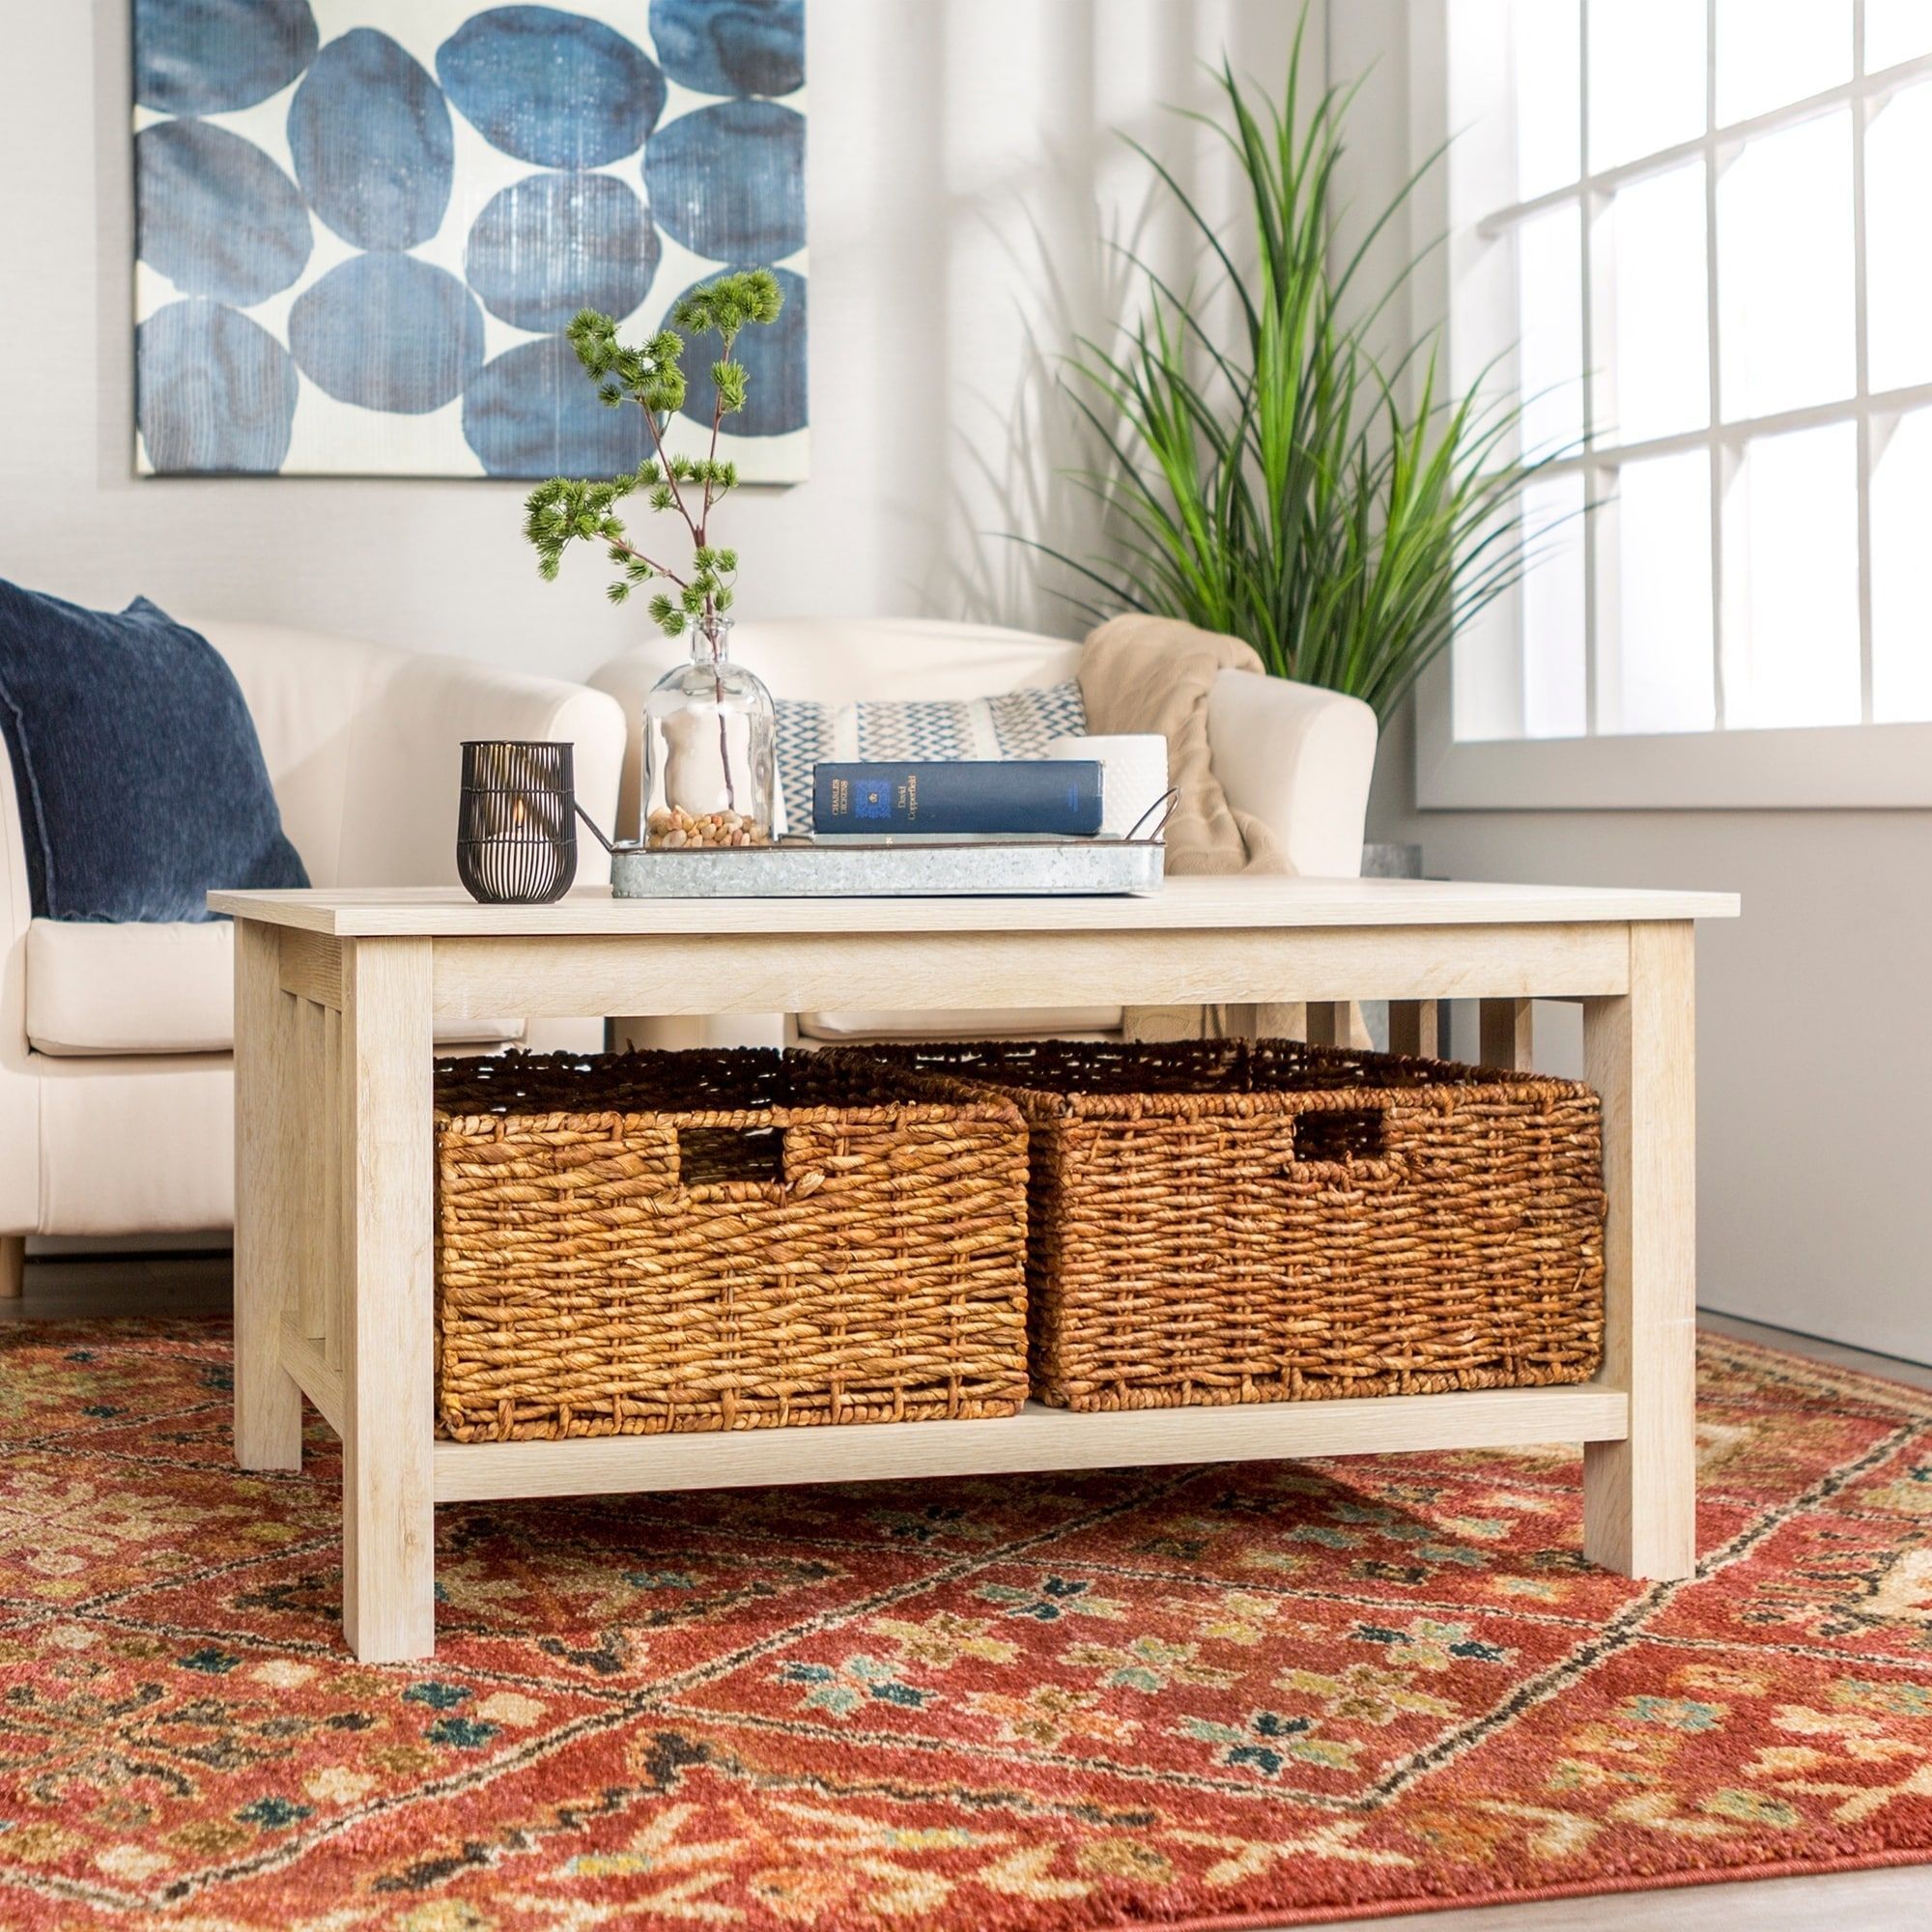 White Coffee Table With Storage Baskets / Diy Rustic Coffee Table With Within Coffee Tables With Open Storage Shelves (Gallery 13 of 20)